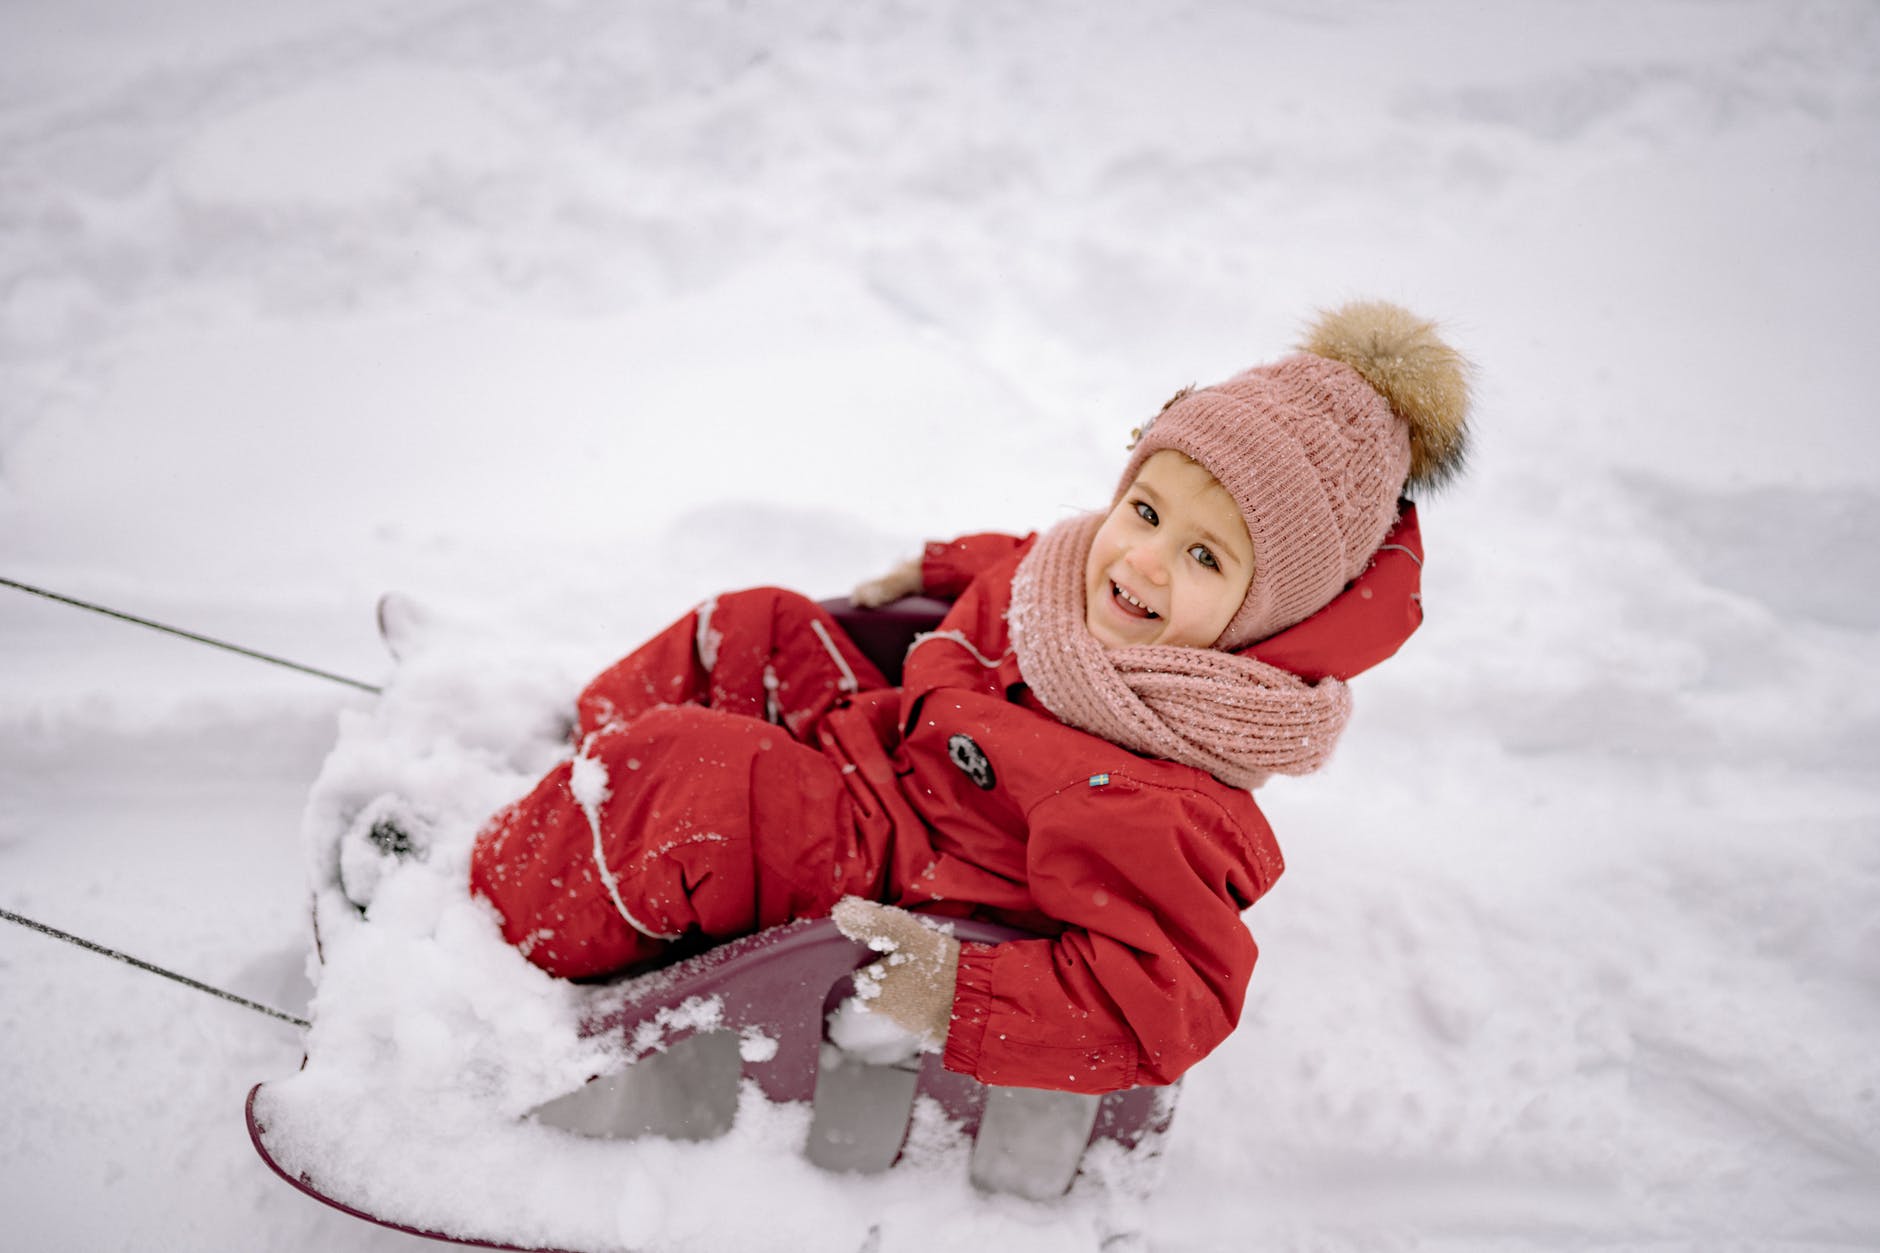 Tips for Snow Days and Snow Activities